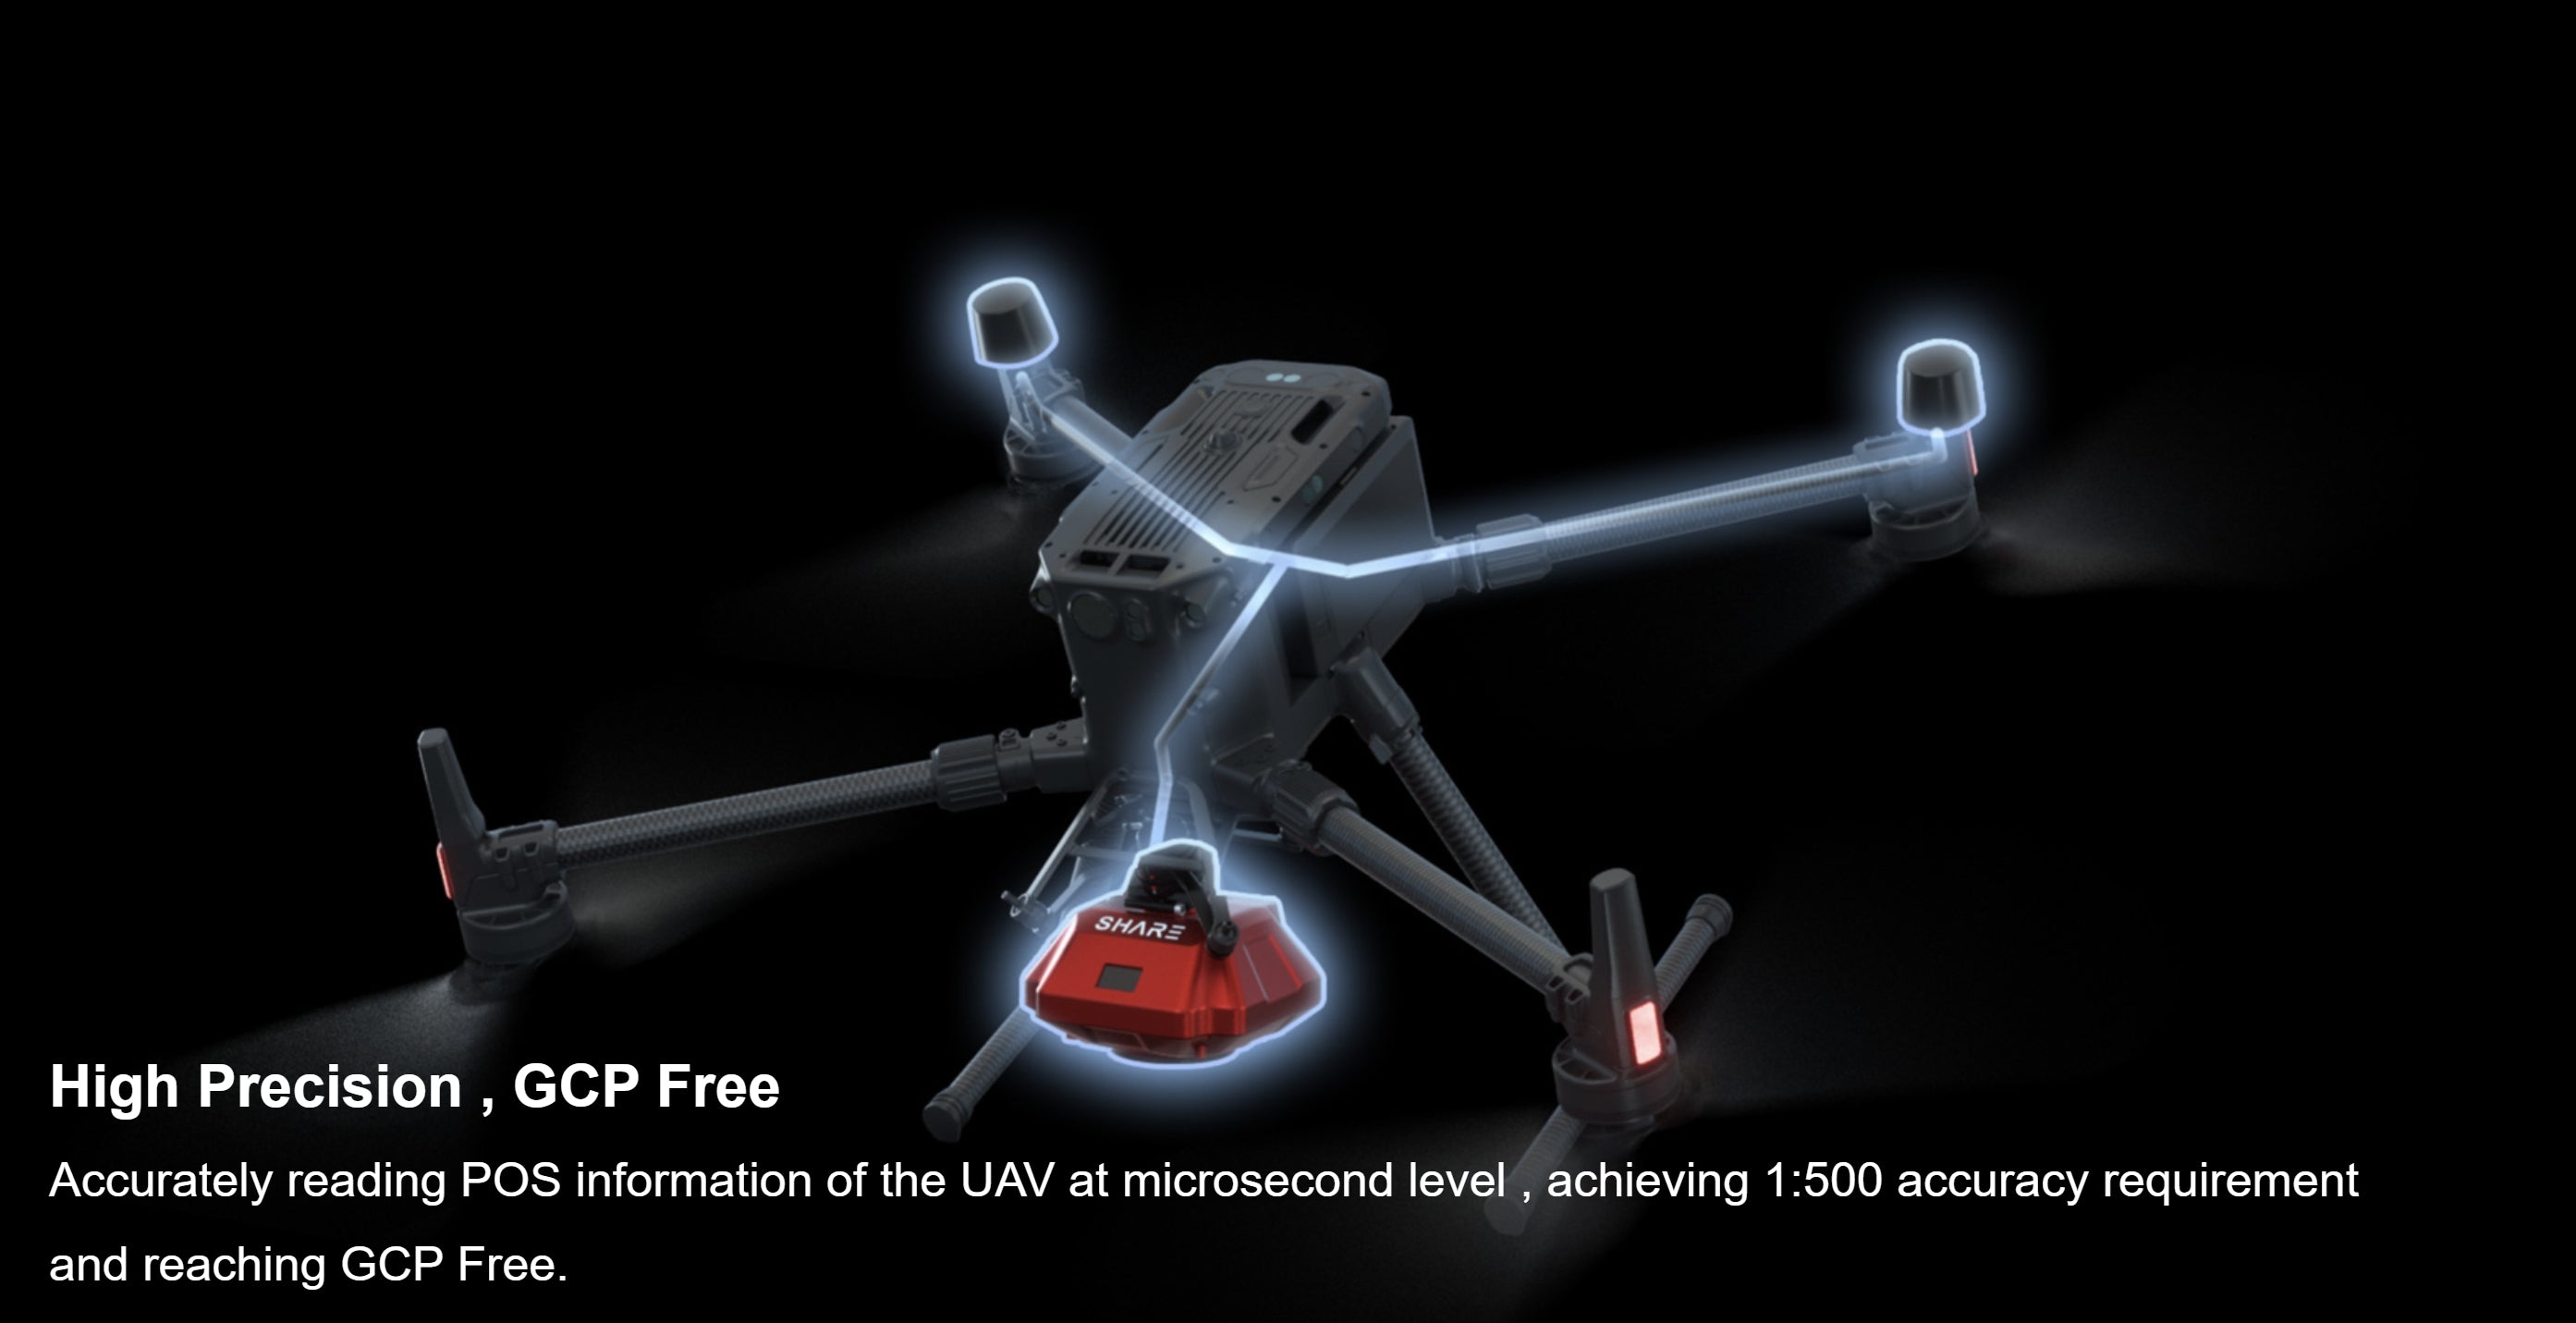 SHARE 102S Pro V2, High-precision aerial camera provides accurate positional information without GCPs.